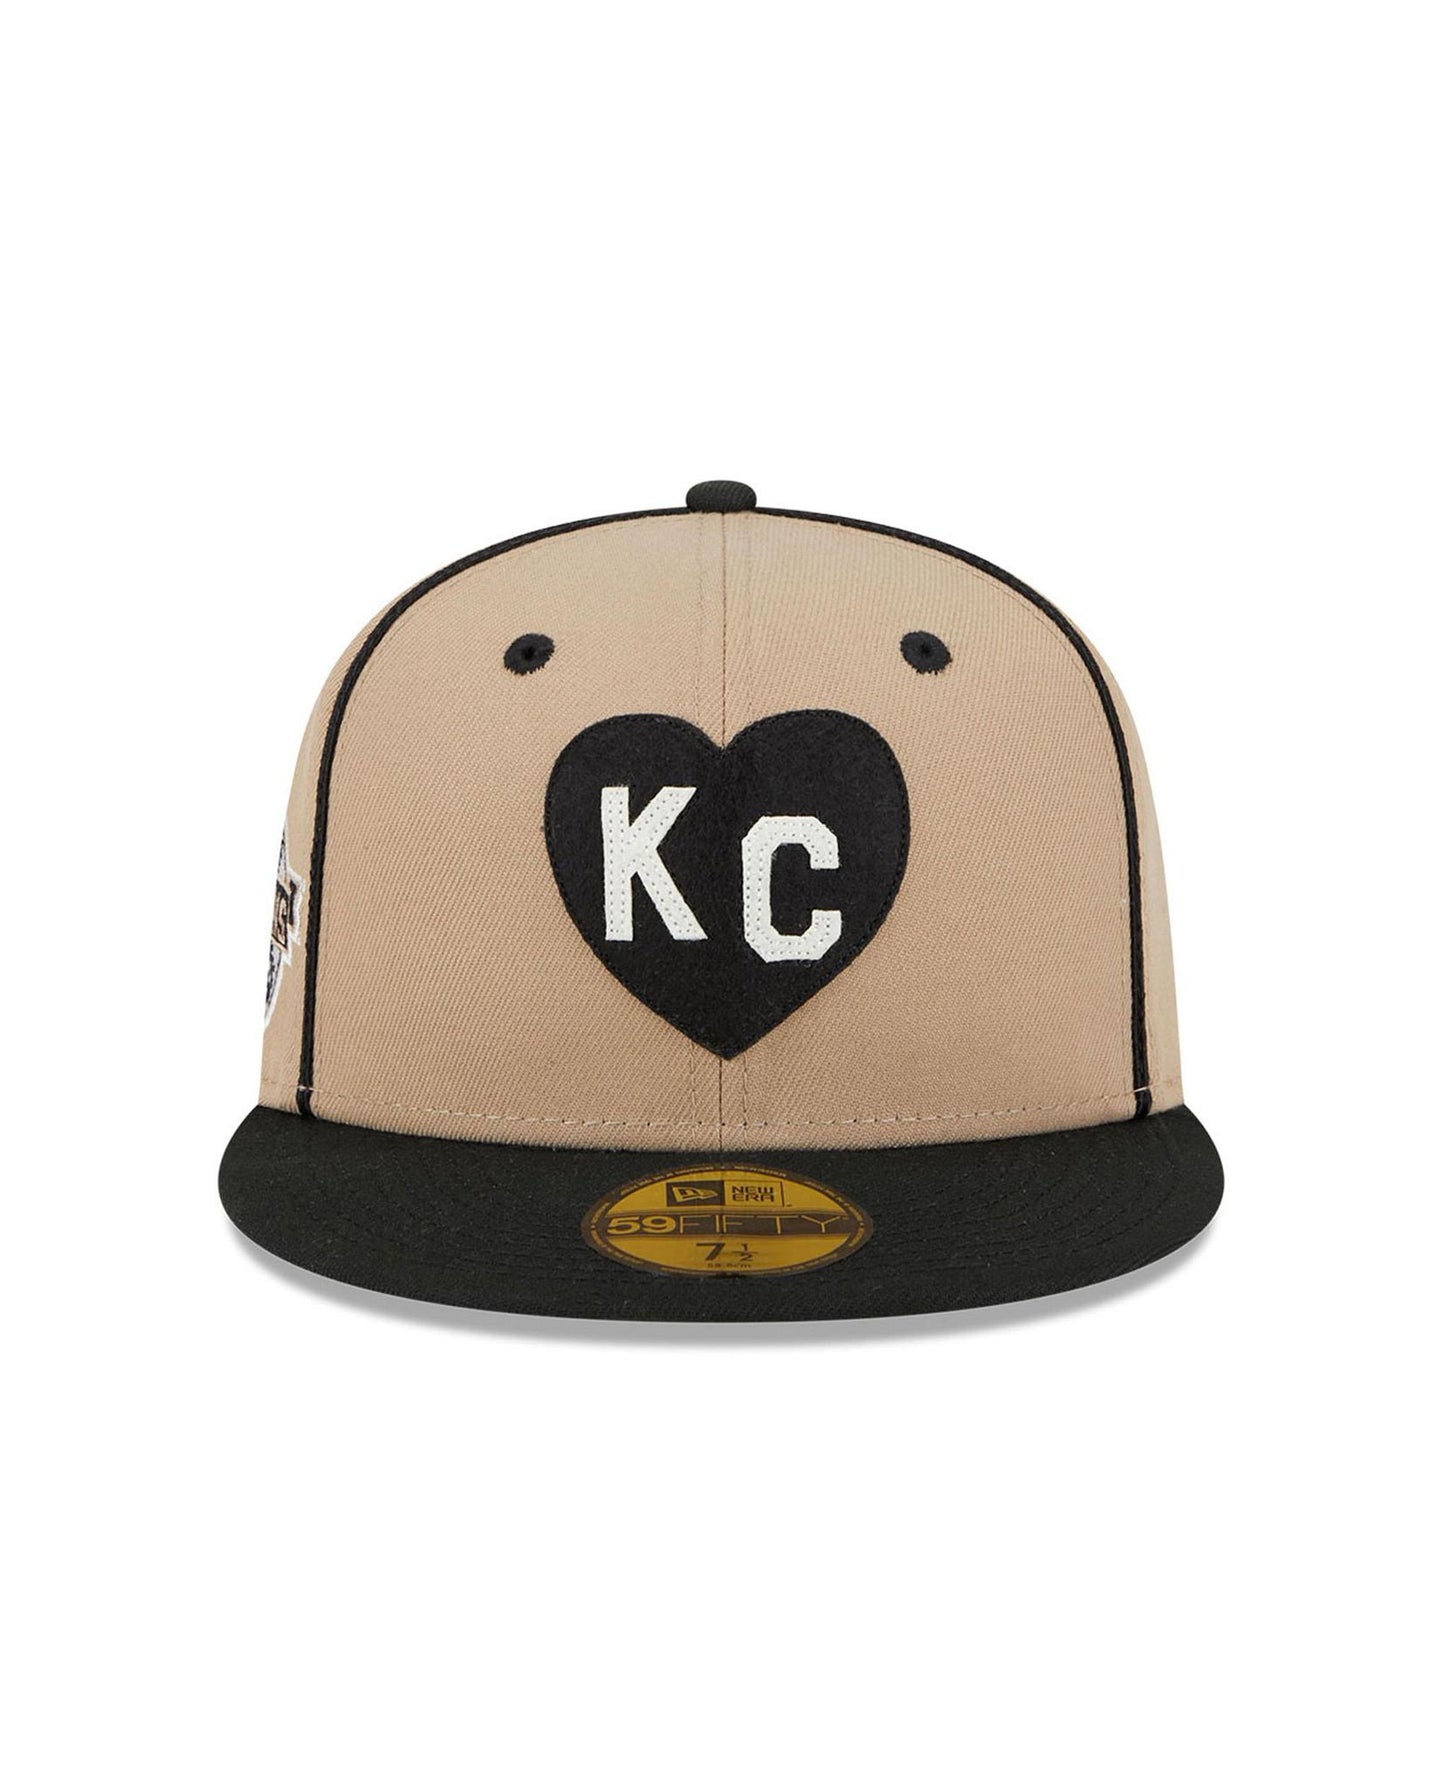 New Era Kansas City Royals Black 59FIFTY Fitted Hat